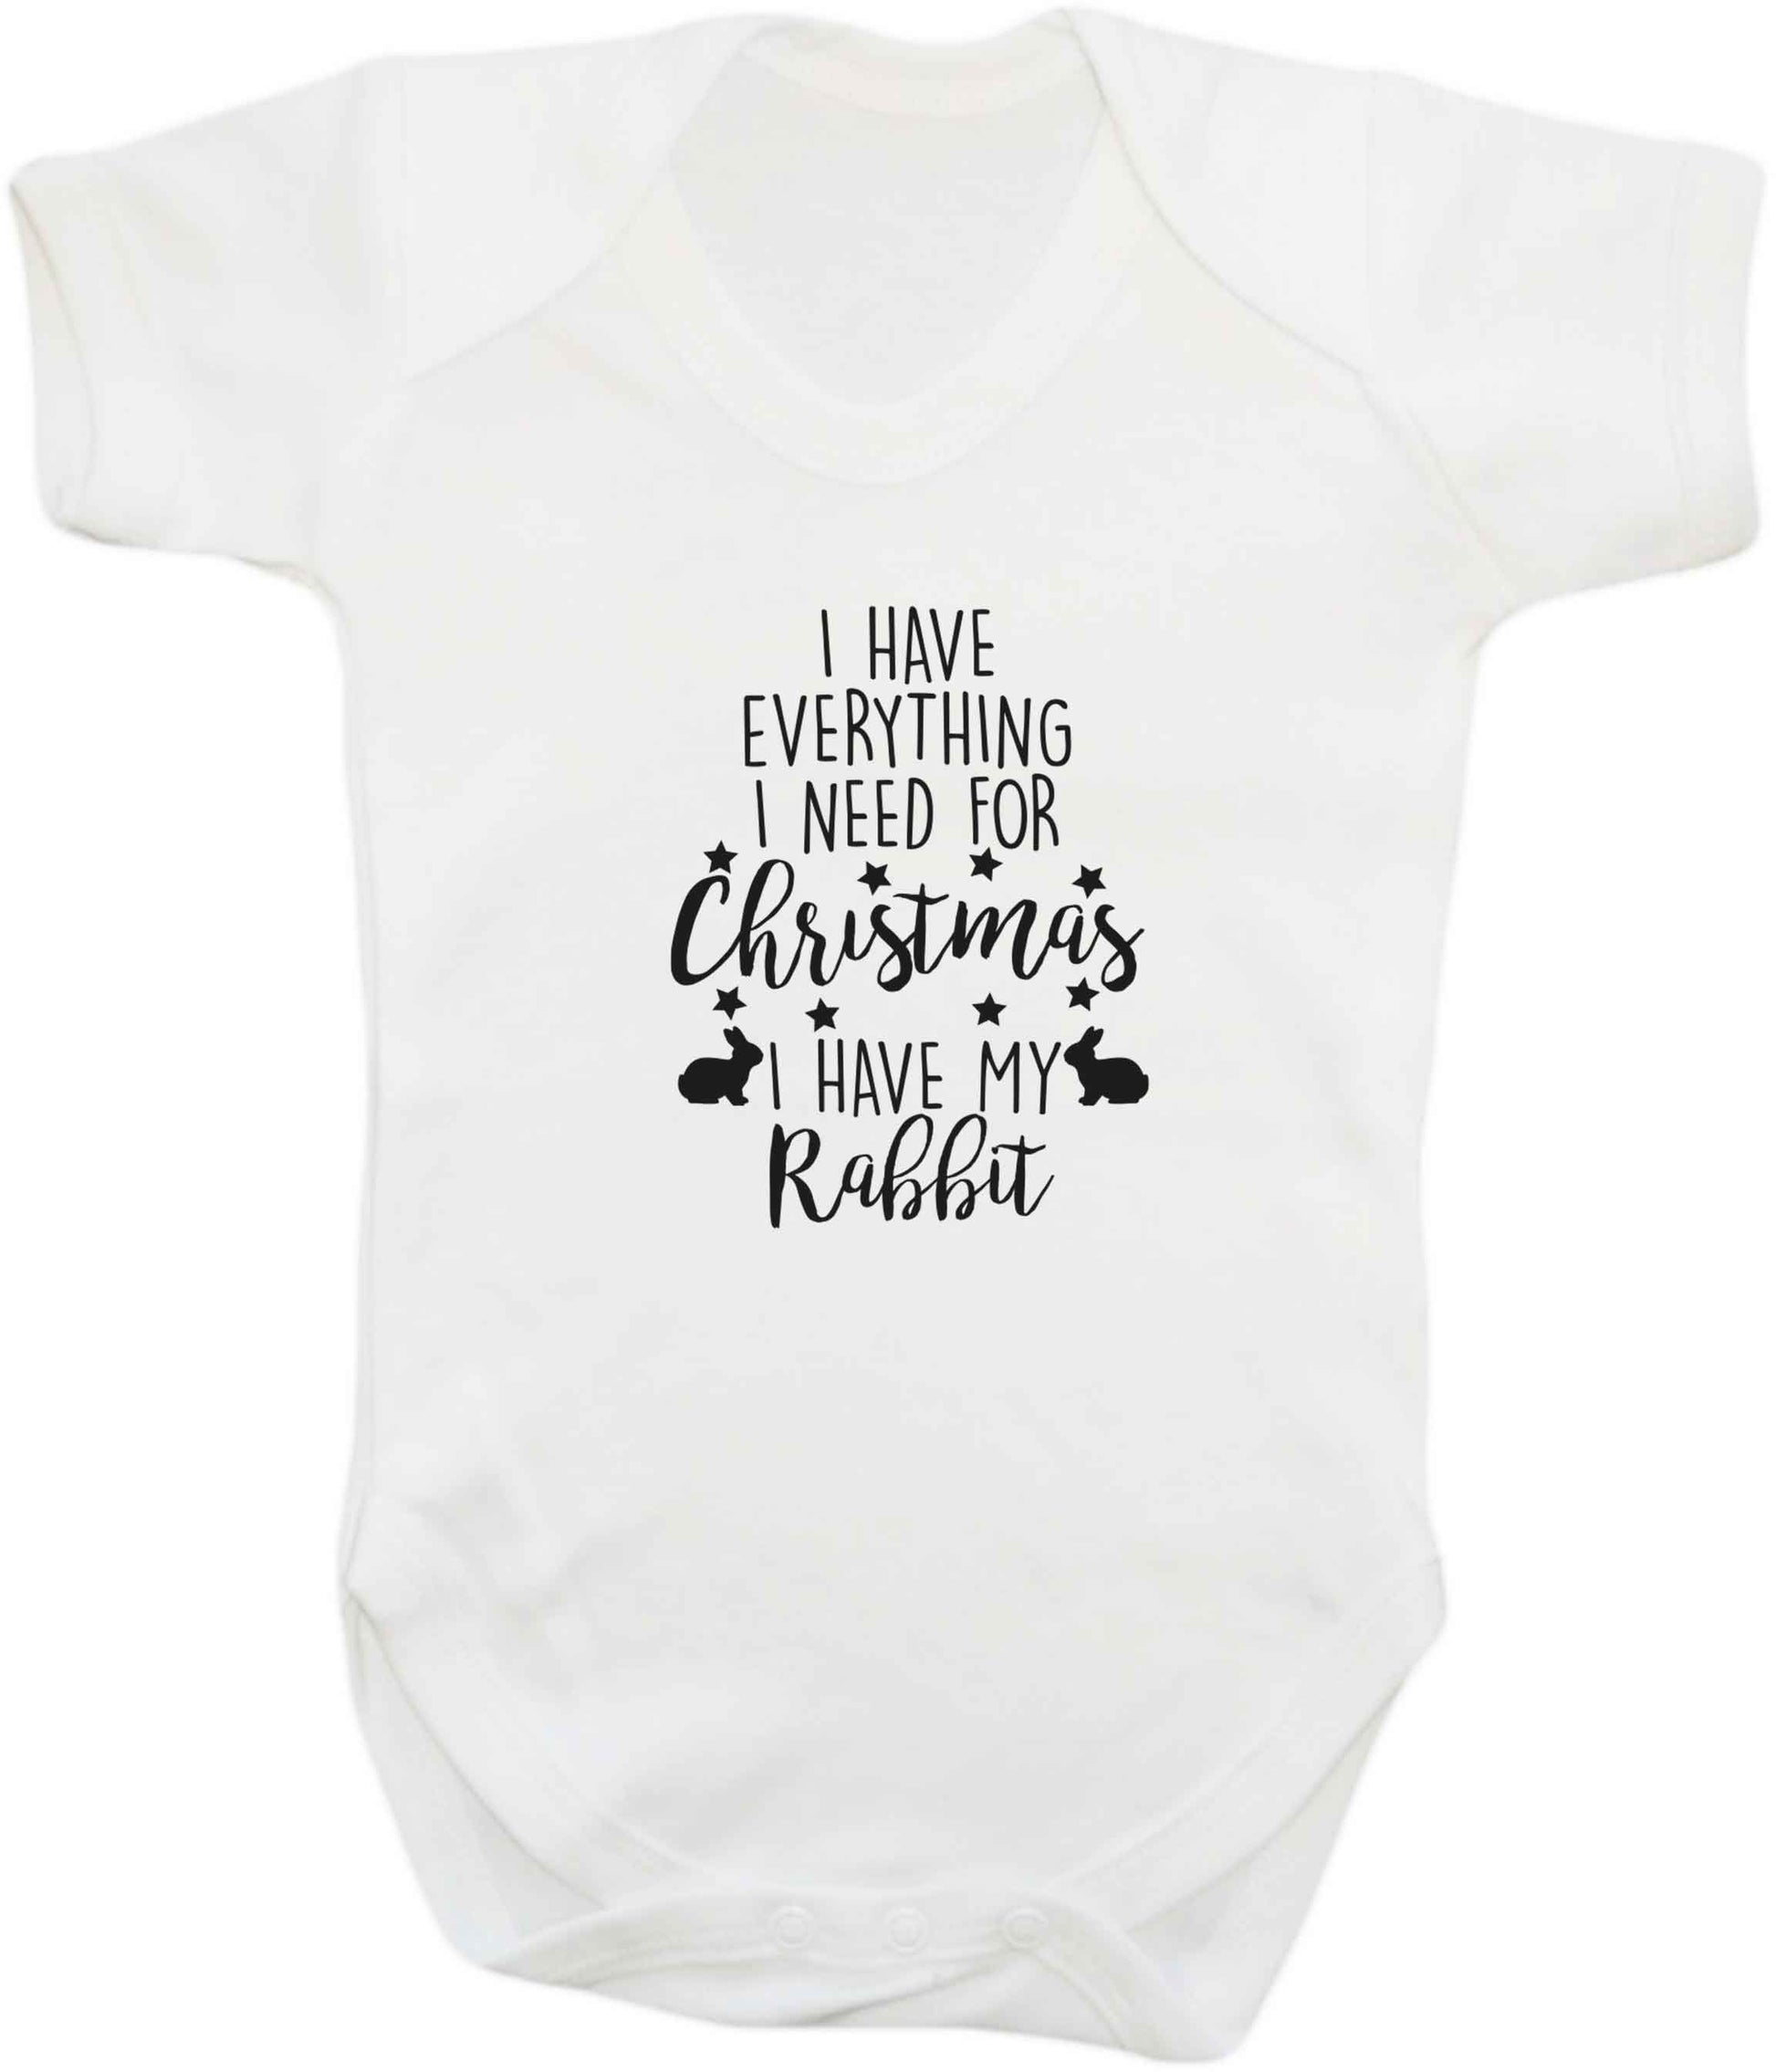 I have everything I need for Christmas I have my rabbit baby vest white 18-24 months